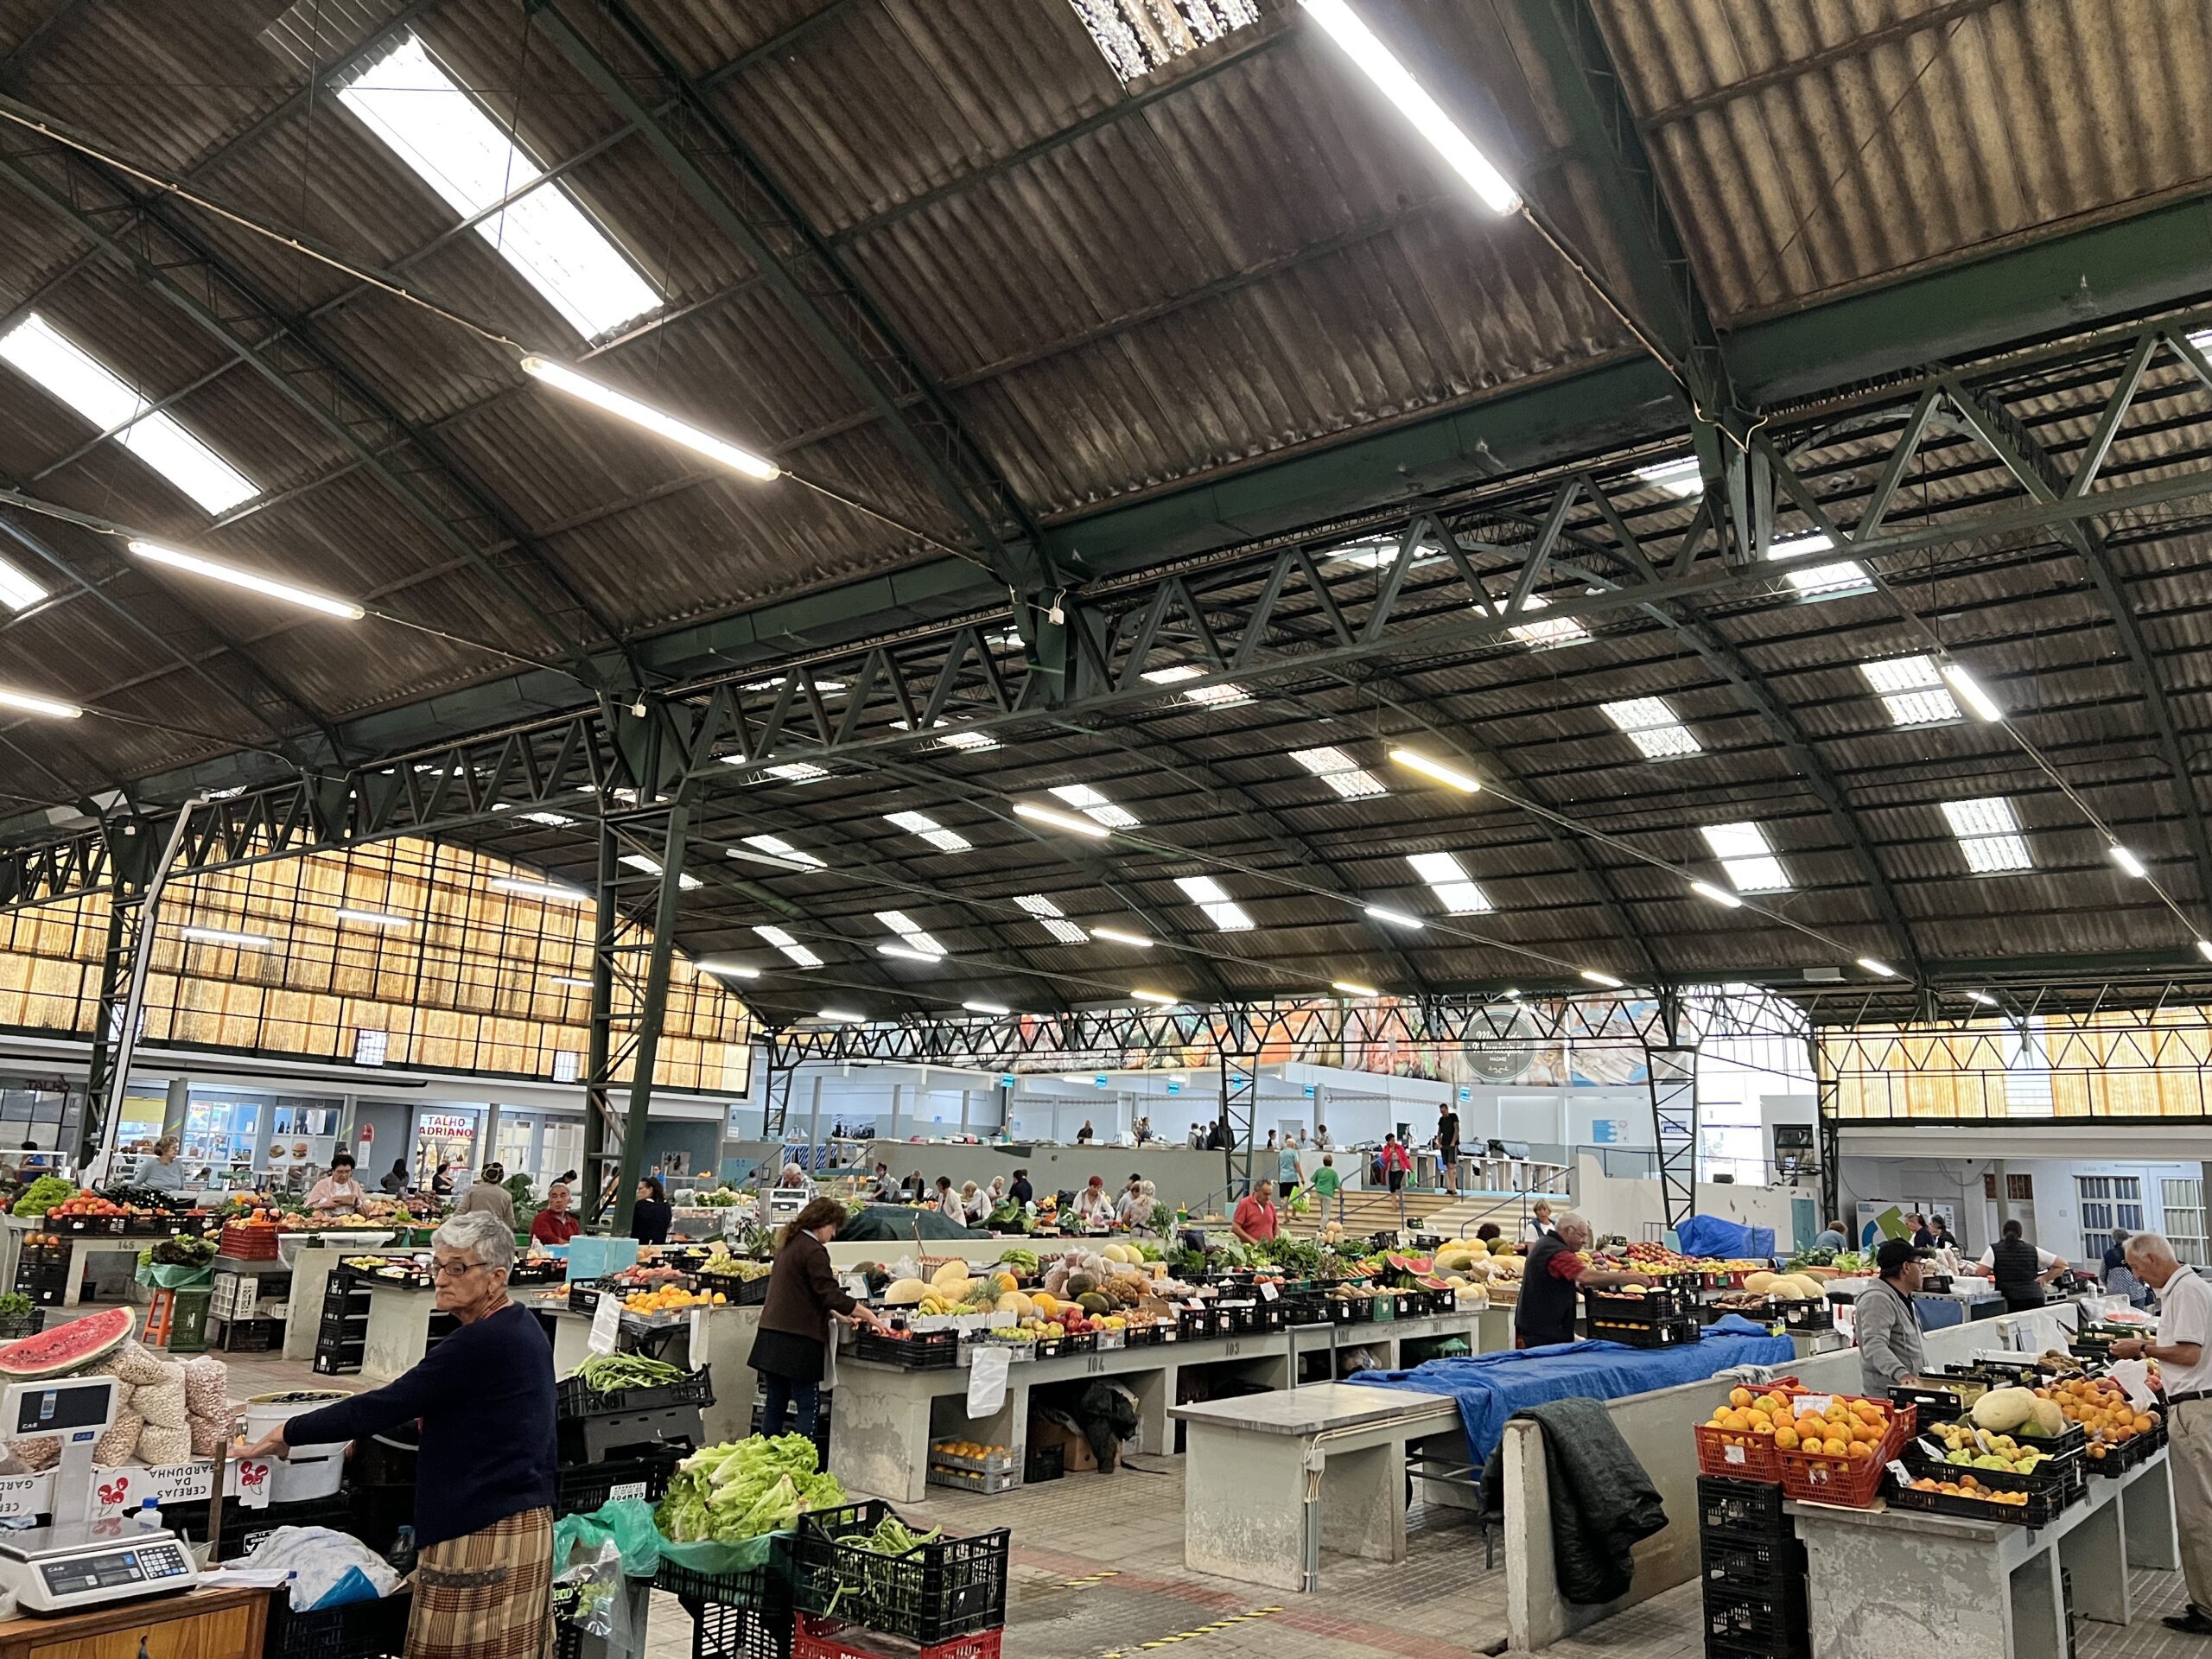 market to get grilled fish, fruits and other groceries.